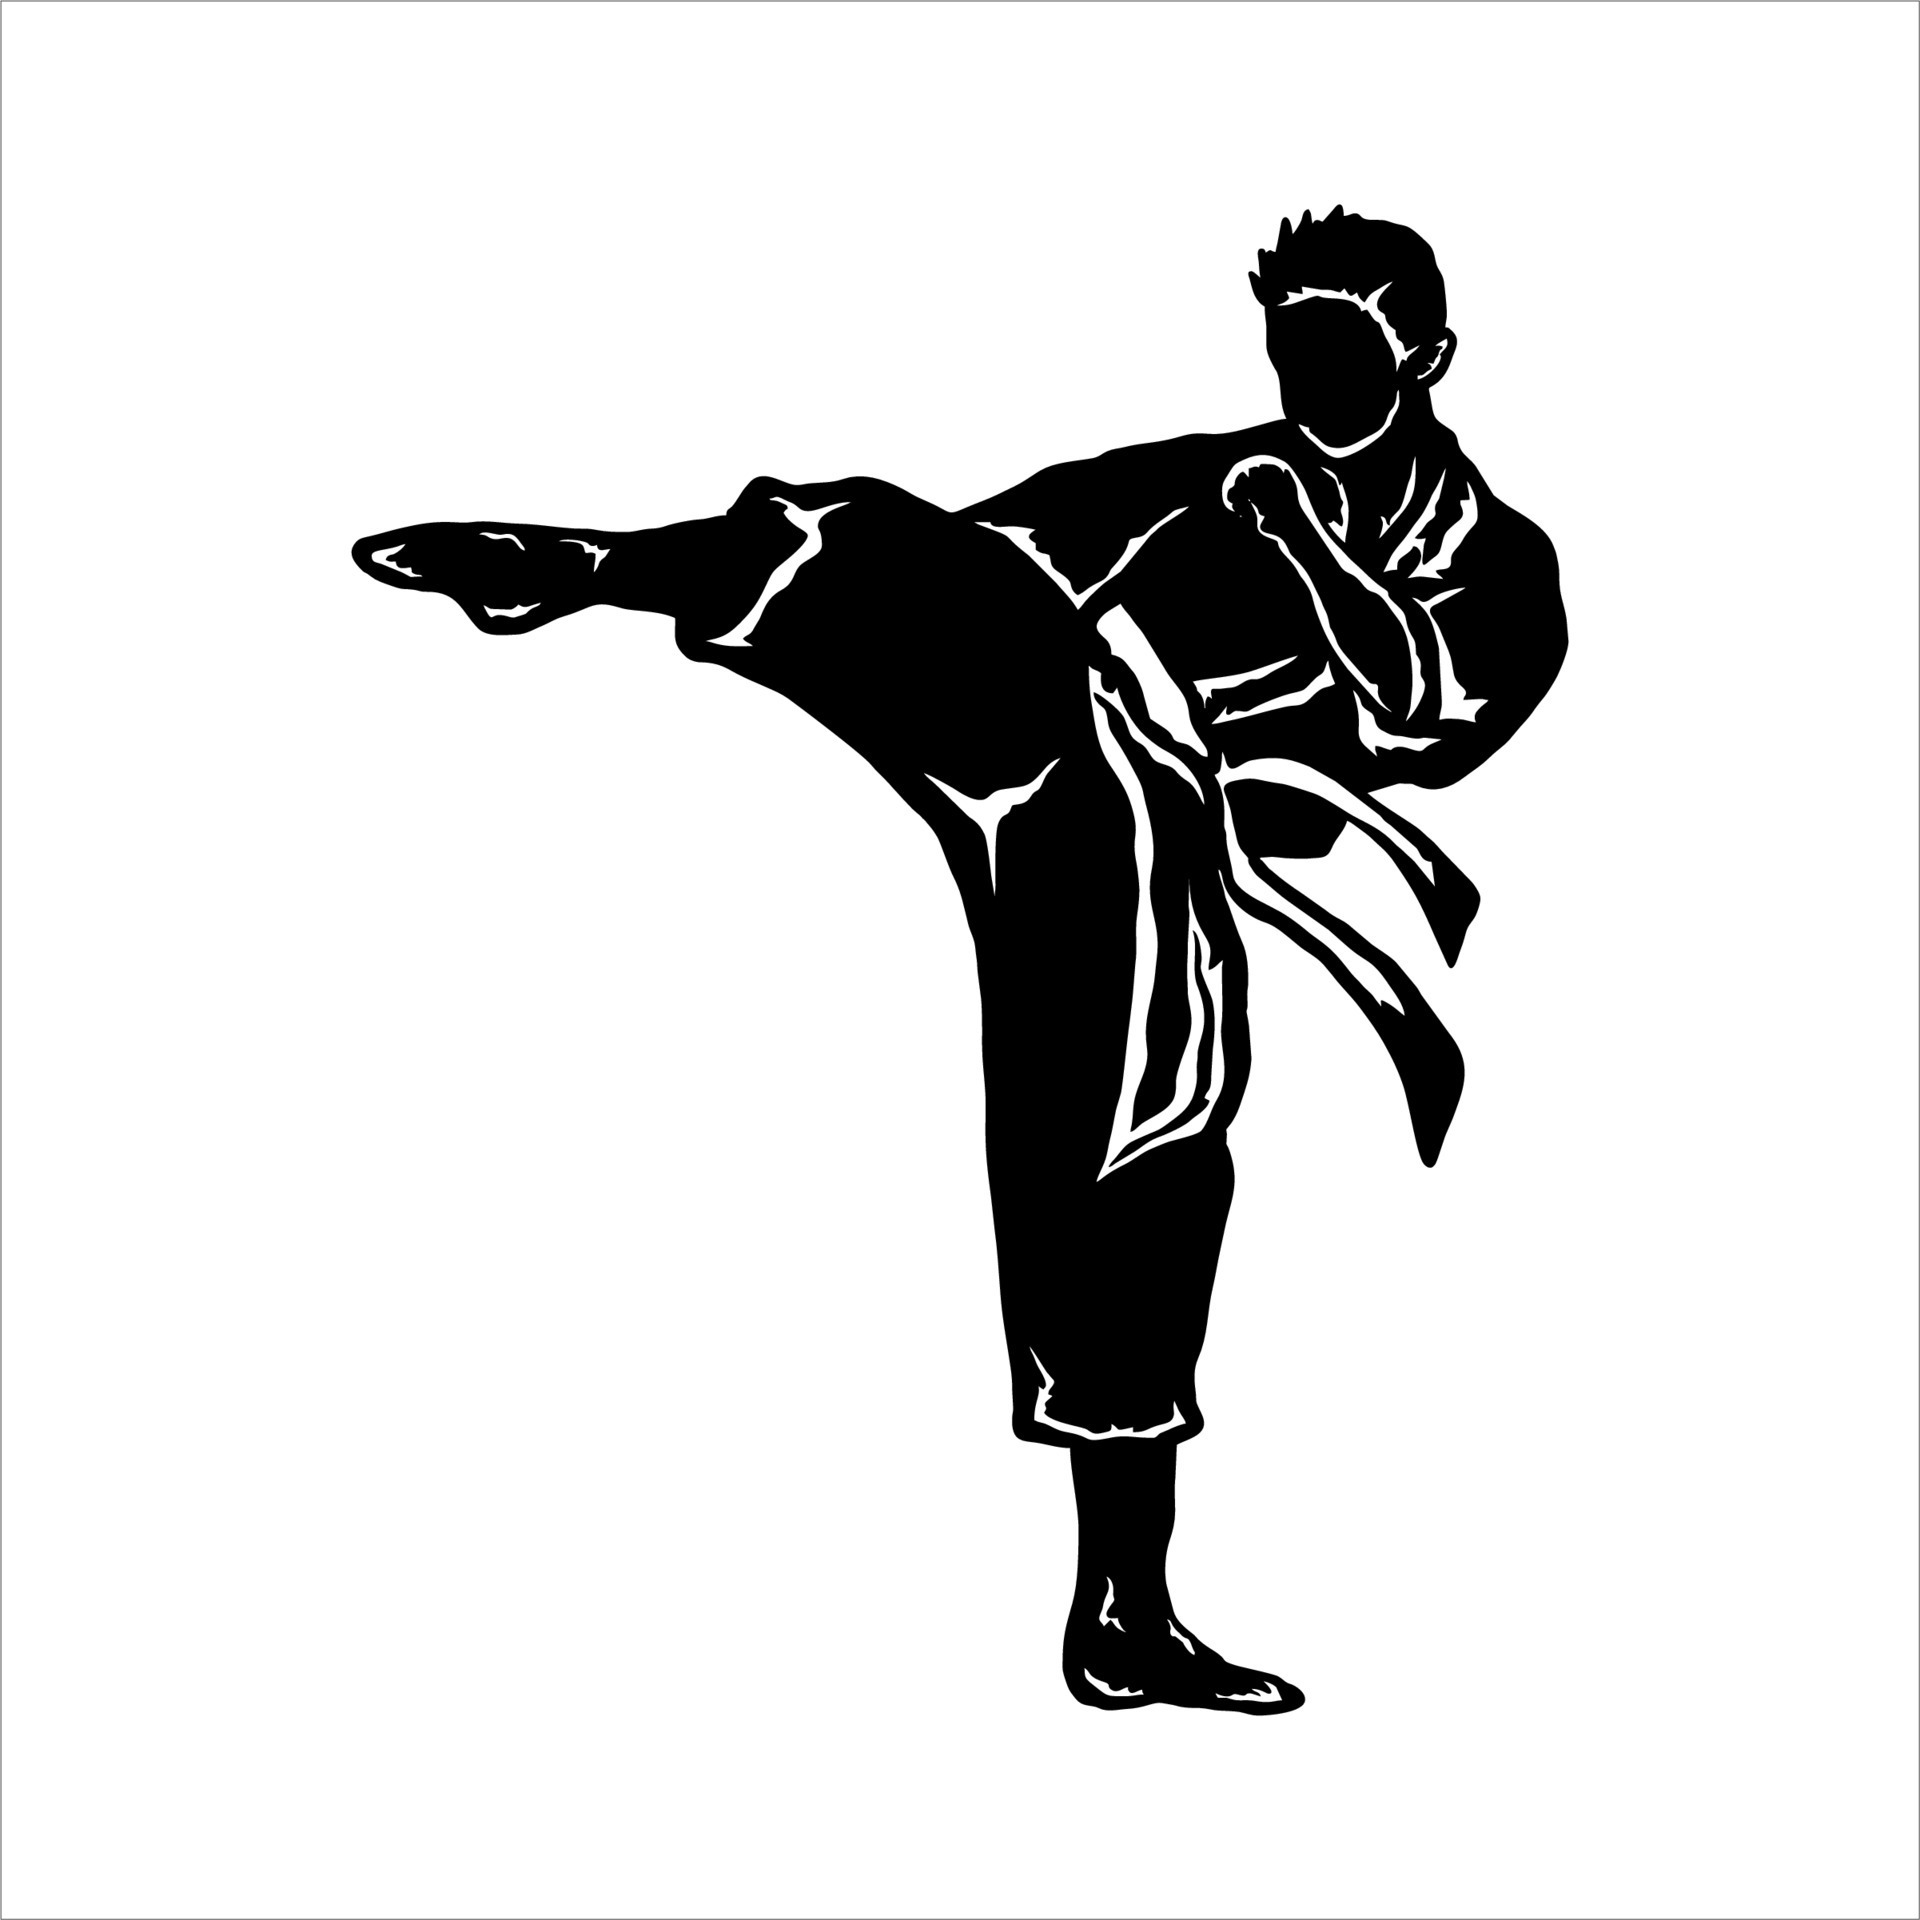 Fast kick fighting technique silhouette vector illustration. Modern and ...